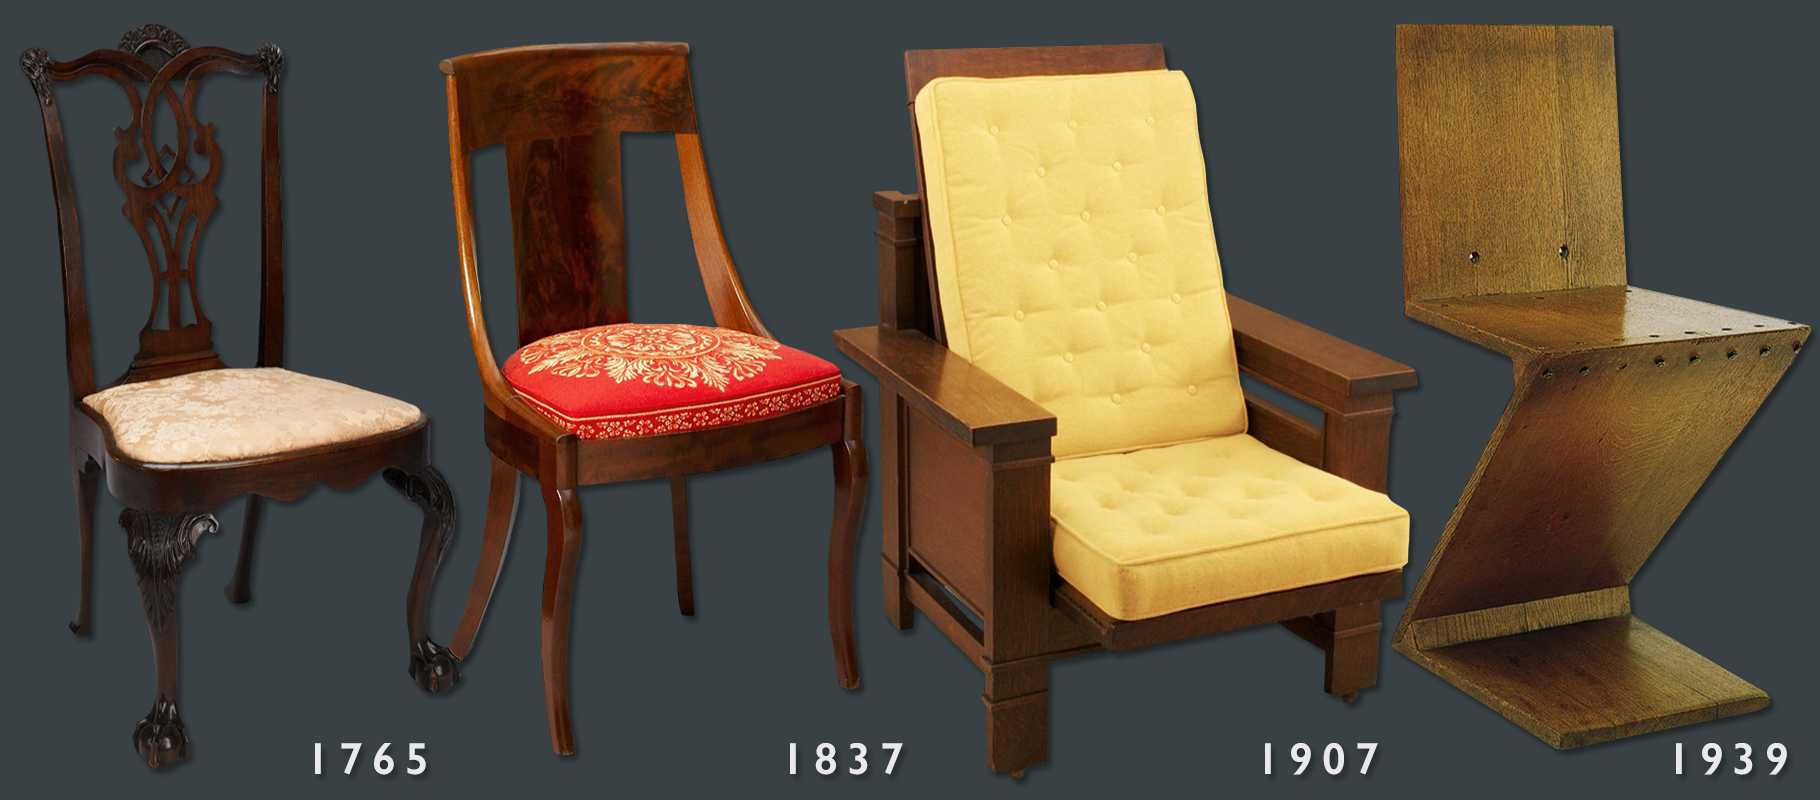 The Perfect Options For Choosing The Antique Furniture Items - RSG Antiques